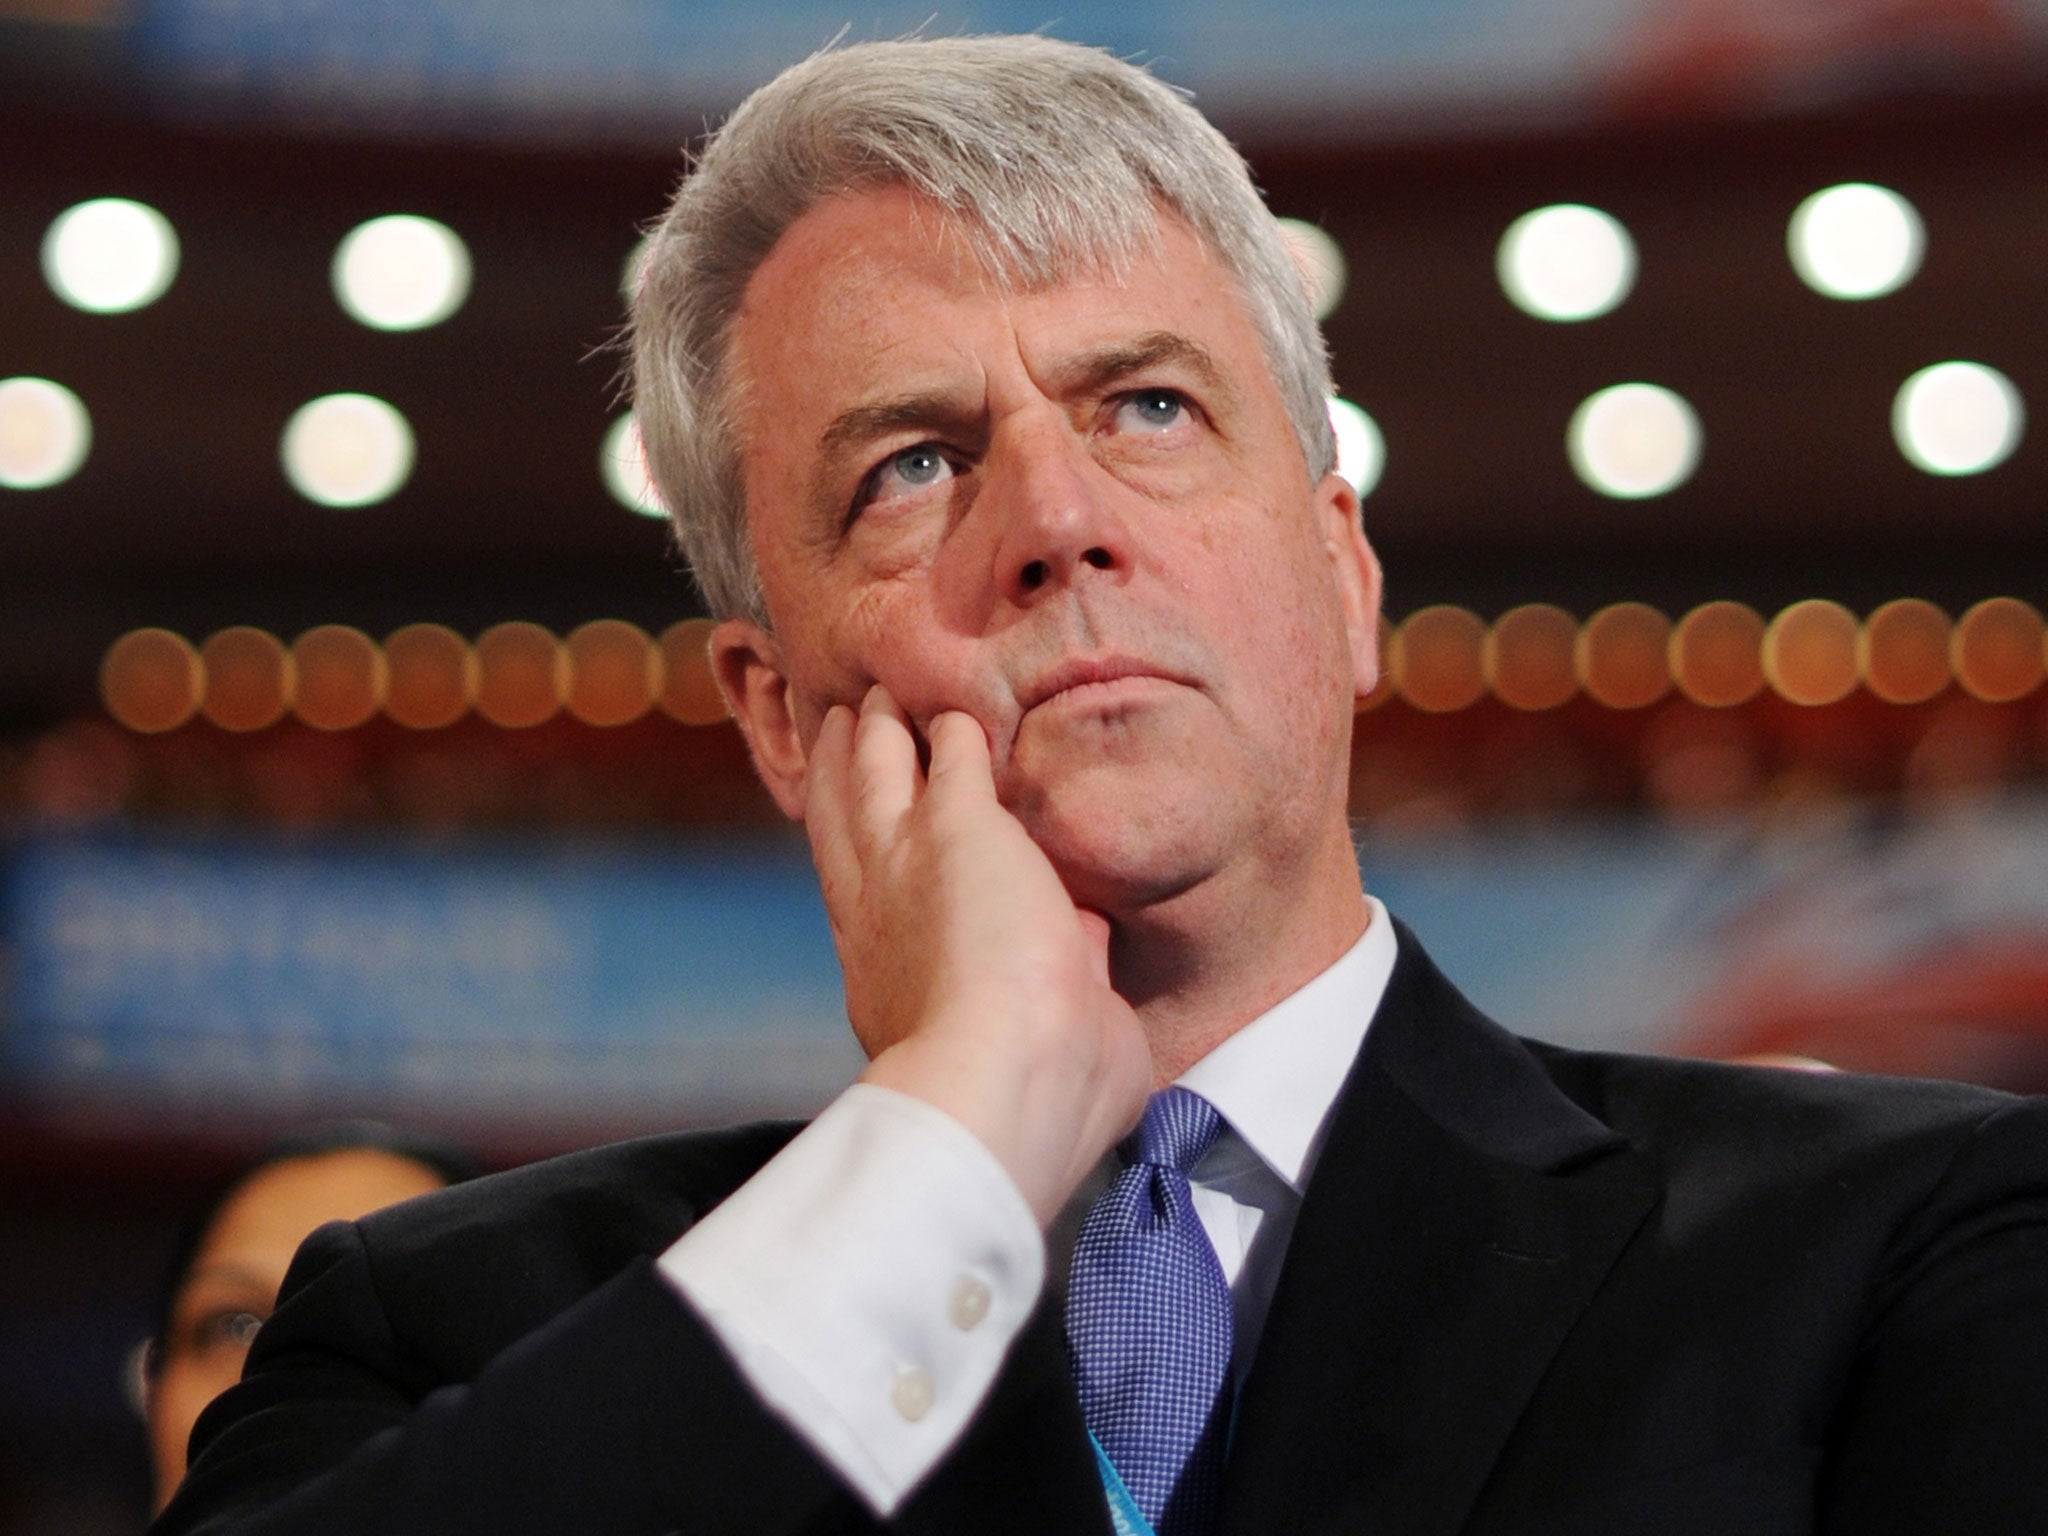 The Leader of the Commons, Andrew Lansley, and his Liberal Democrat deputy, Tom Brake, have proposed that in future years no more than three amendments to the Queen’s Speech will be allowed